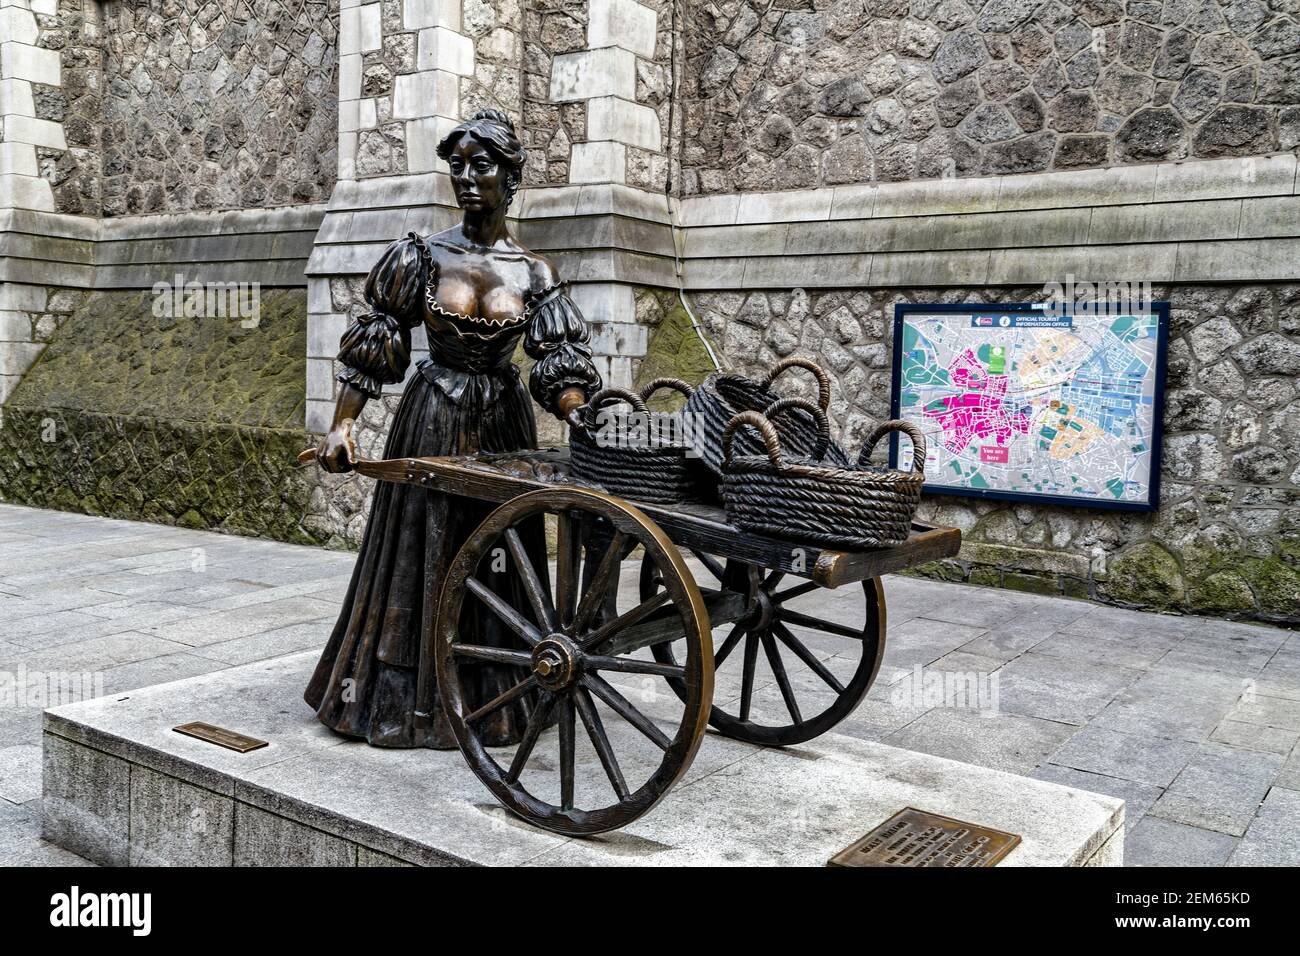 Dublin, Ireland. 6th May, 2016. Molly Malone Statue, designed by Jeanne Rynhart and located at the bottom of Grafton Street in Dublin. Stock Photo